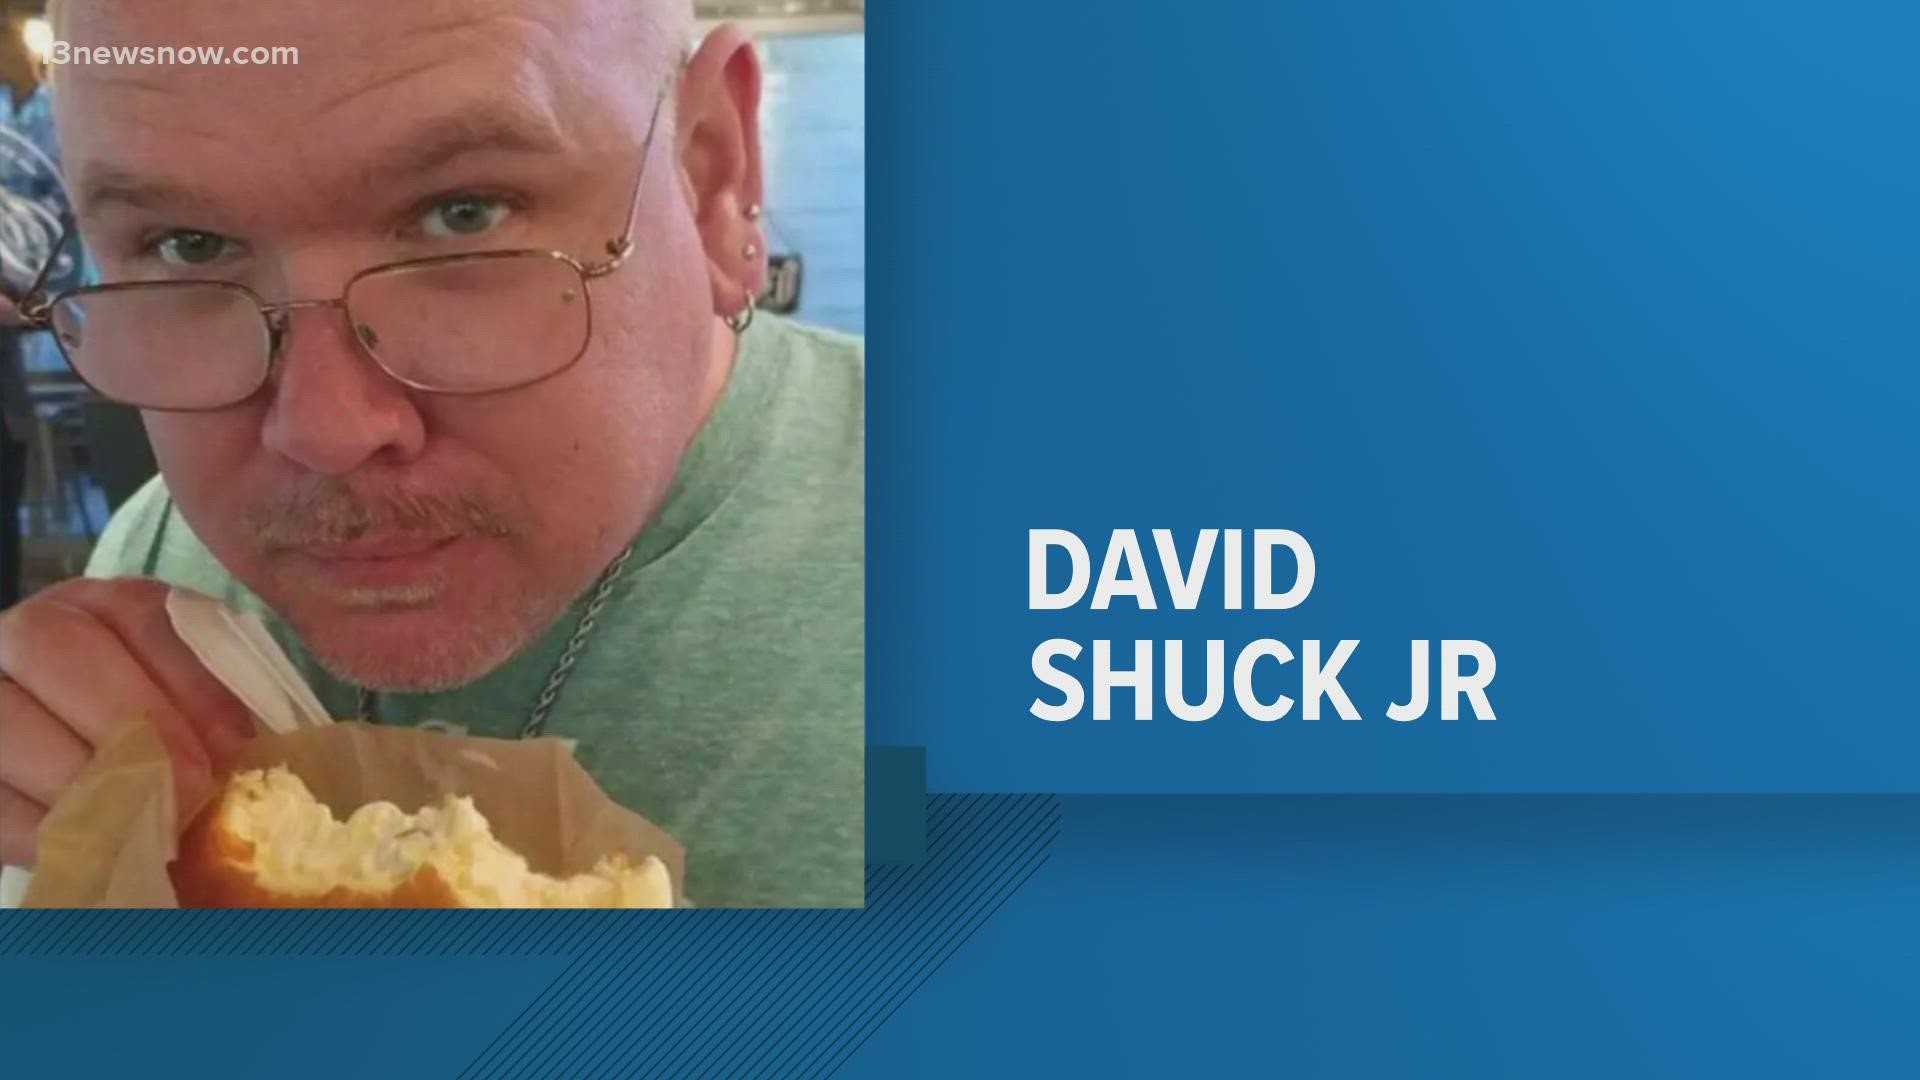 The 50-year-old man was last seen on Saturday afternoon.